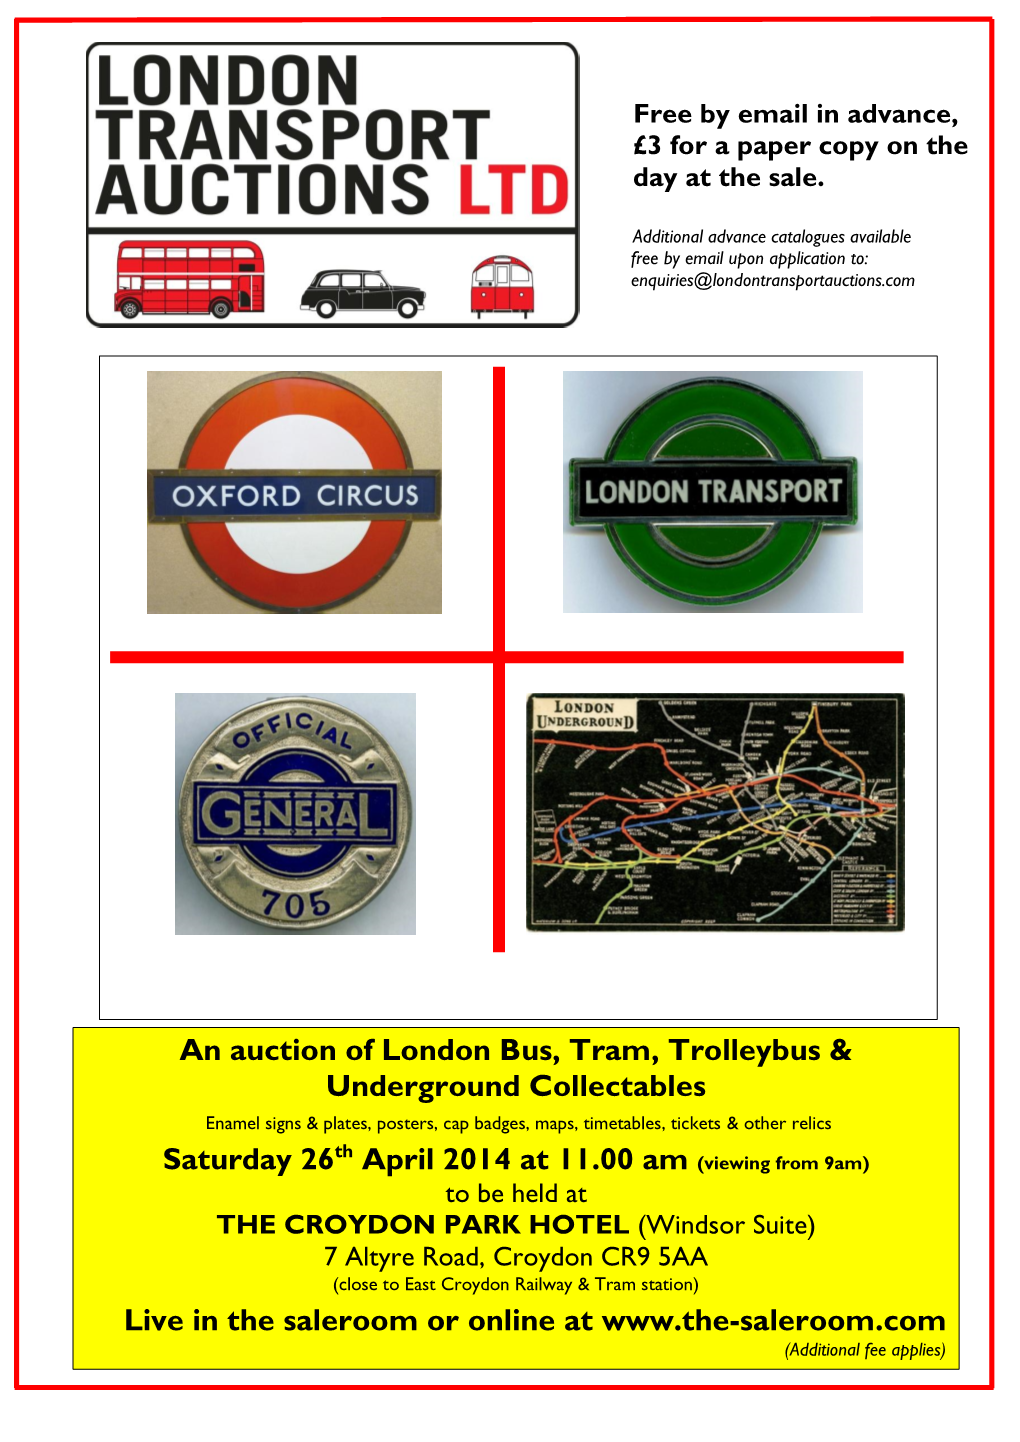 An Auction of London Bus, Tram, Trolleybus & Underground Collectables